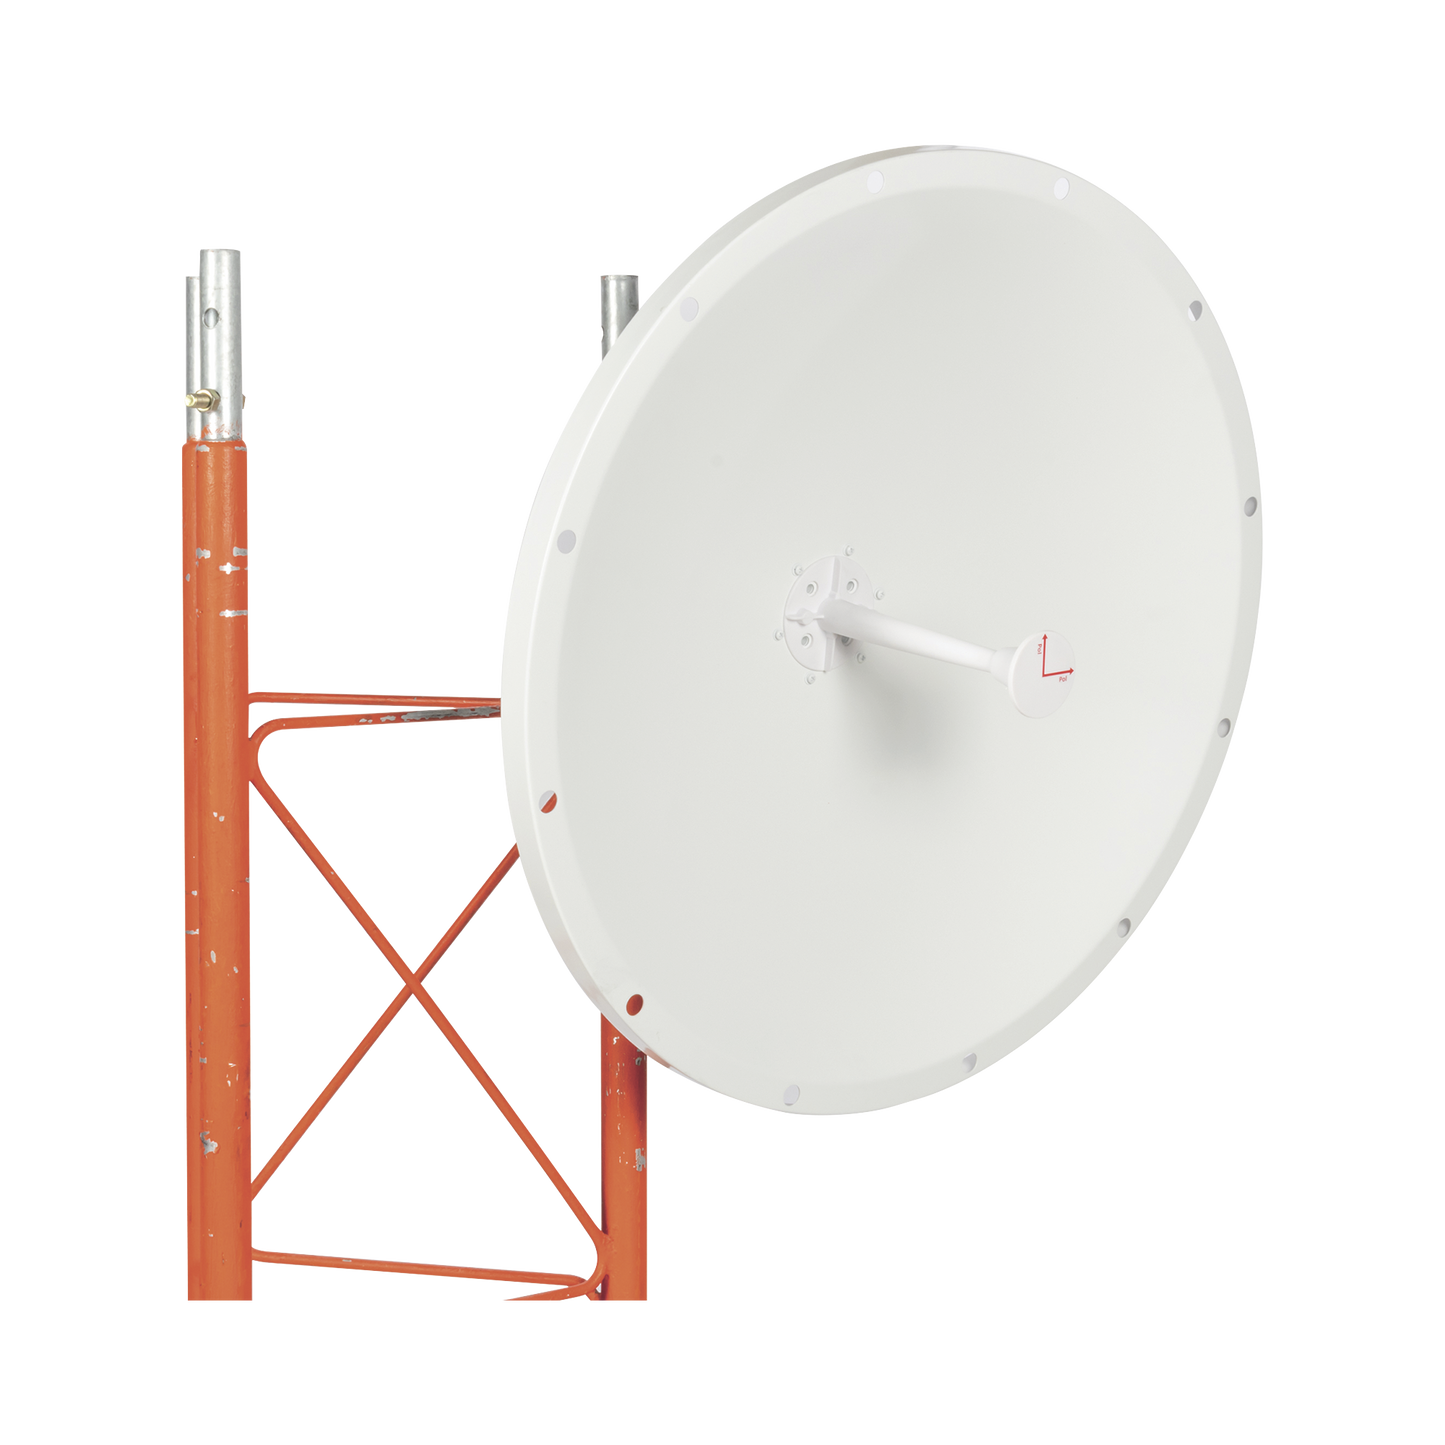 Dish Antenna Extended Frequency, 4.8 - 6-5 GHz, 28 dBi, N-Male Connectors